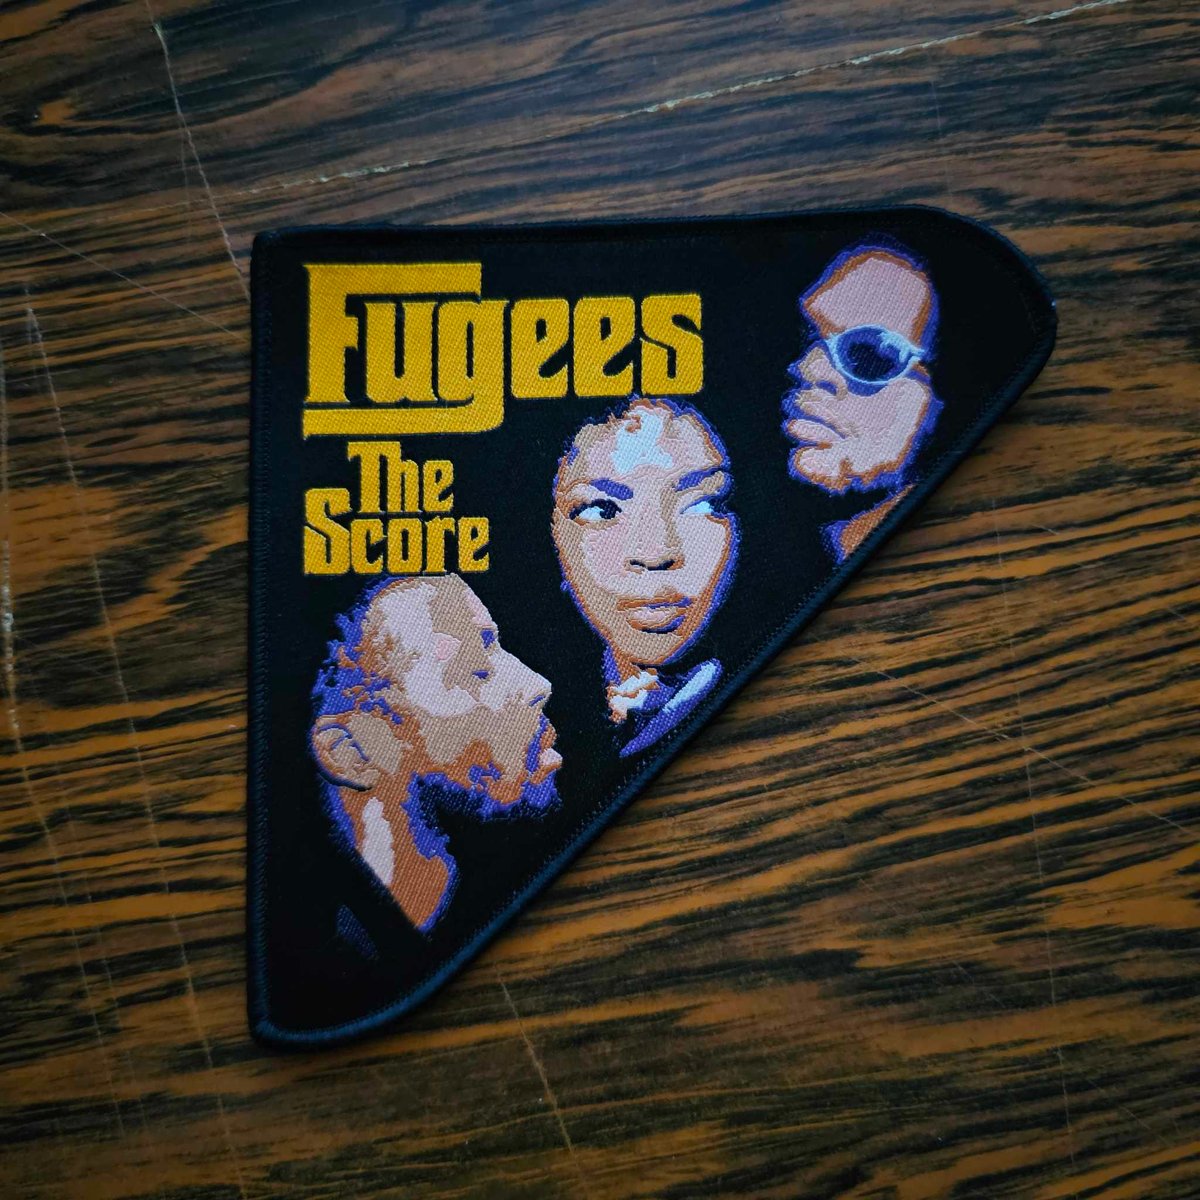 Fugees - The Score | Starside Relics